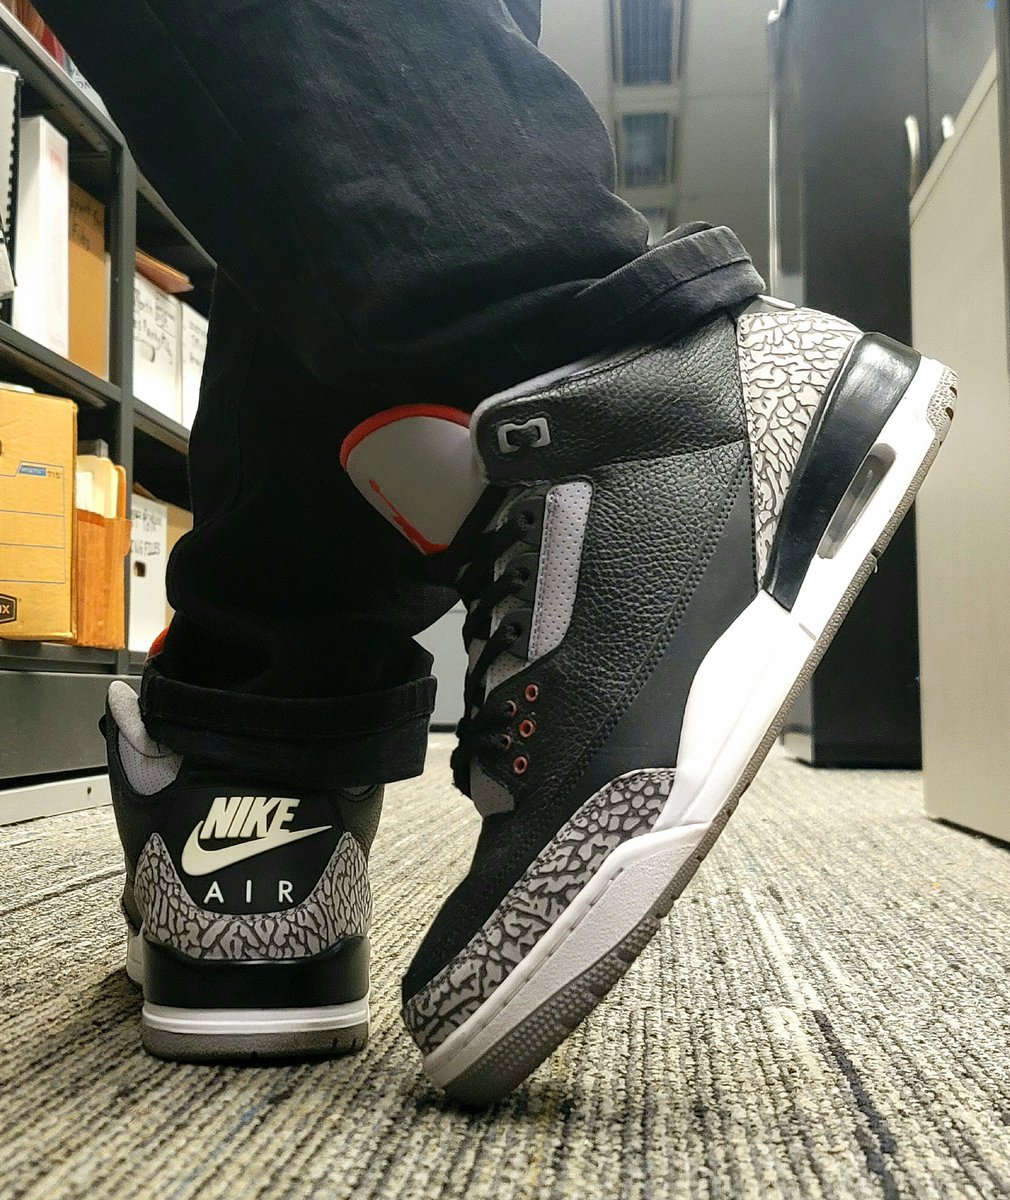 Had to put on a classic today. Jordan 3s . Don't have to say much about these. Great shoe. #Nike #Jordan3s #jumpman #kotd #yoursneakersaredope  #wearyoursneakers
#JMillzChallenge